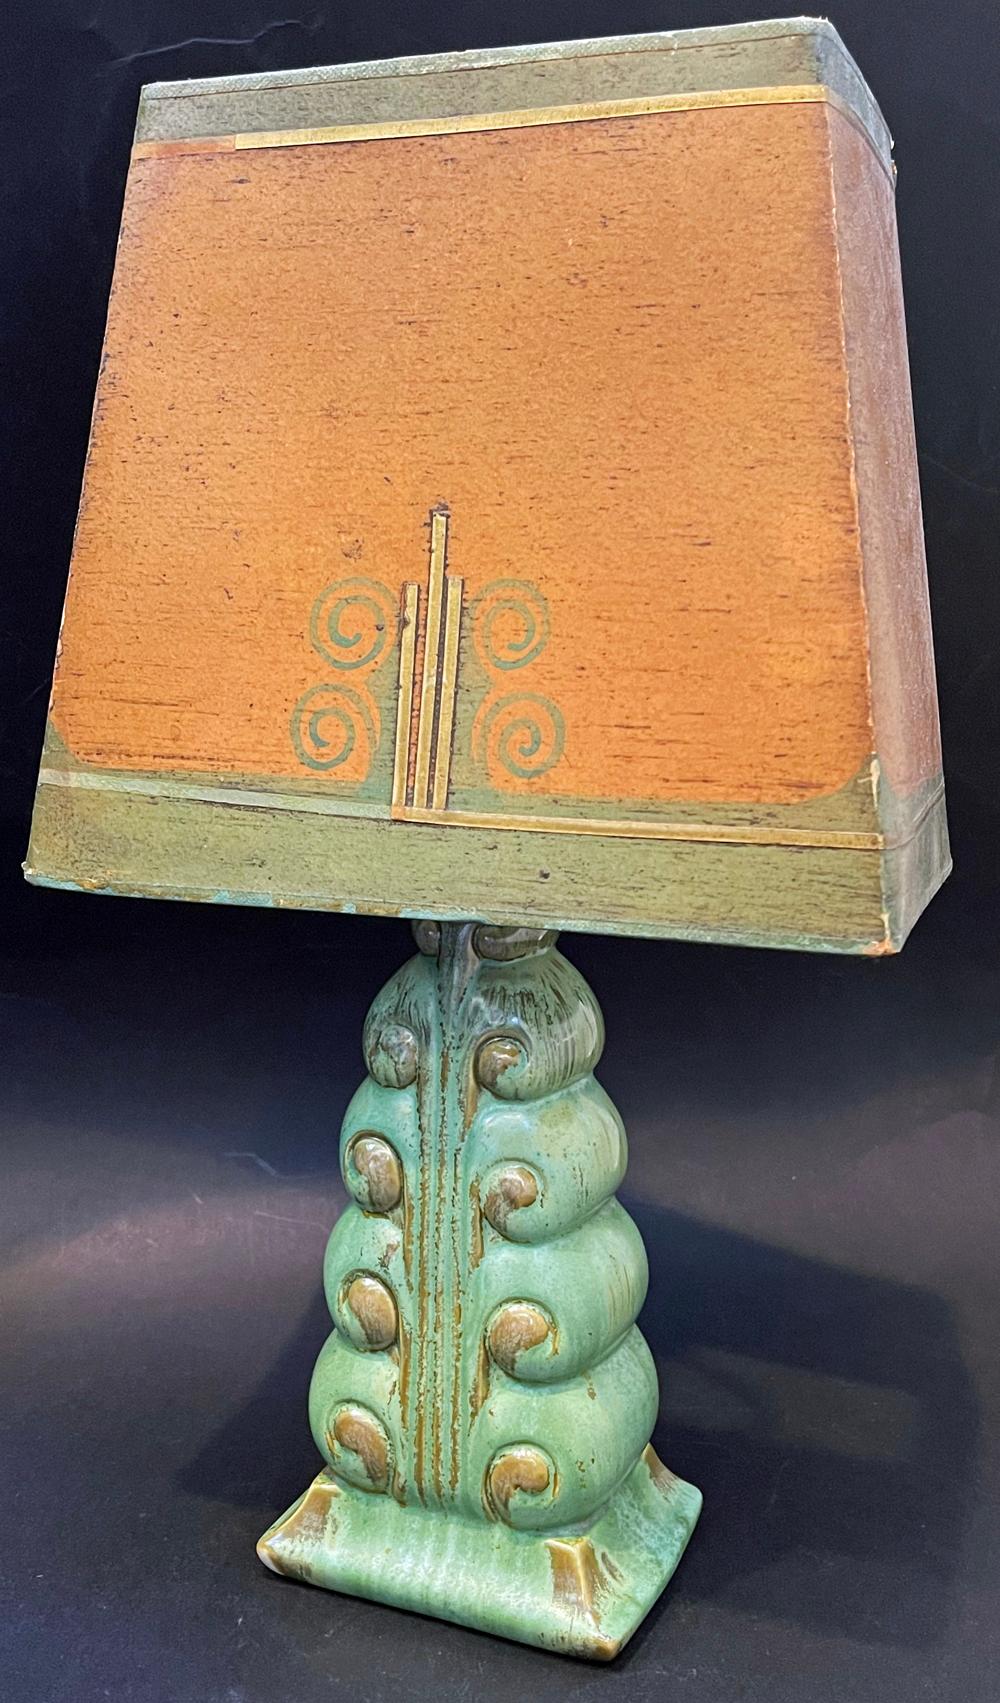 Extraordinary in its rarity and fine design, this green and gold glazed table lamp by sculptor Waylande Gregory was made by the famed Cowan pottery works near Cleveland and includes its original, hand crafted parchment shade in soft pumpkin and